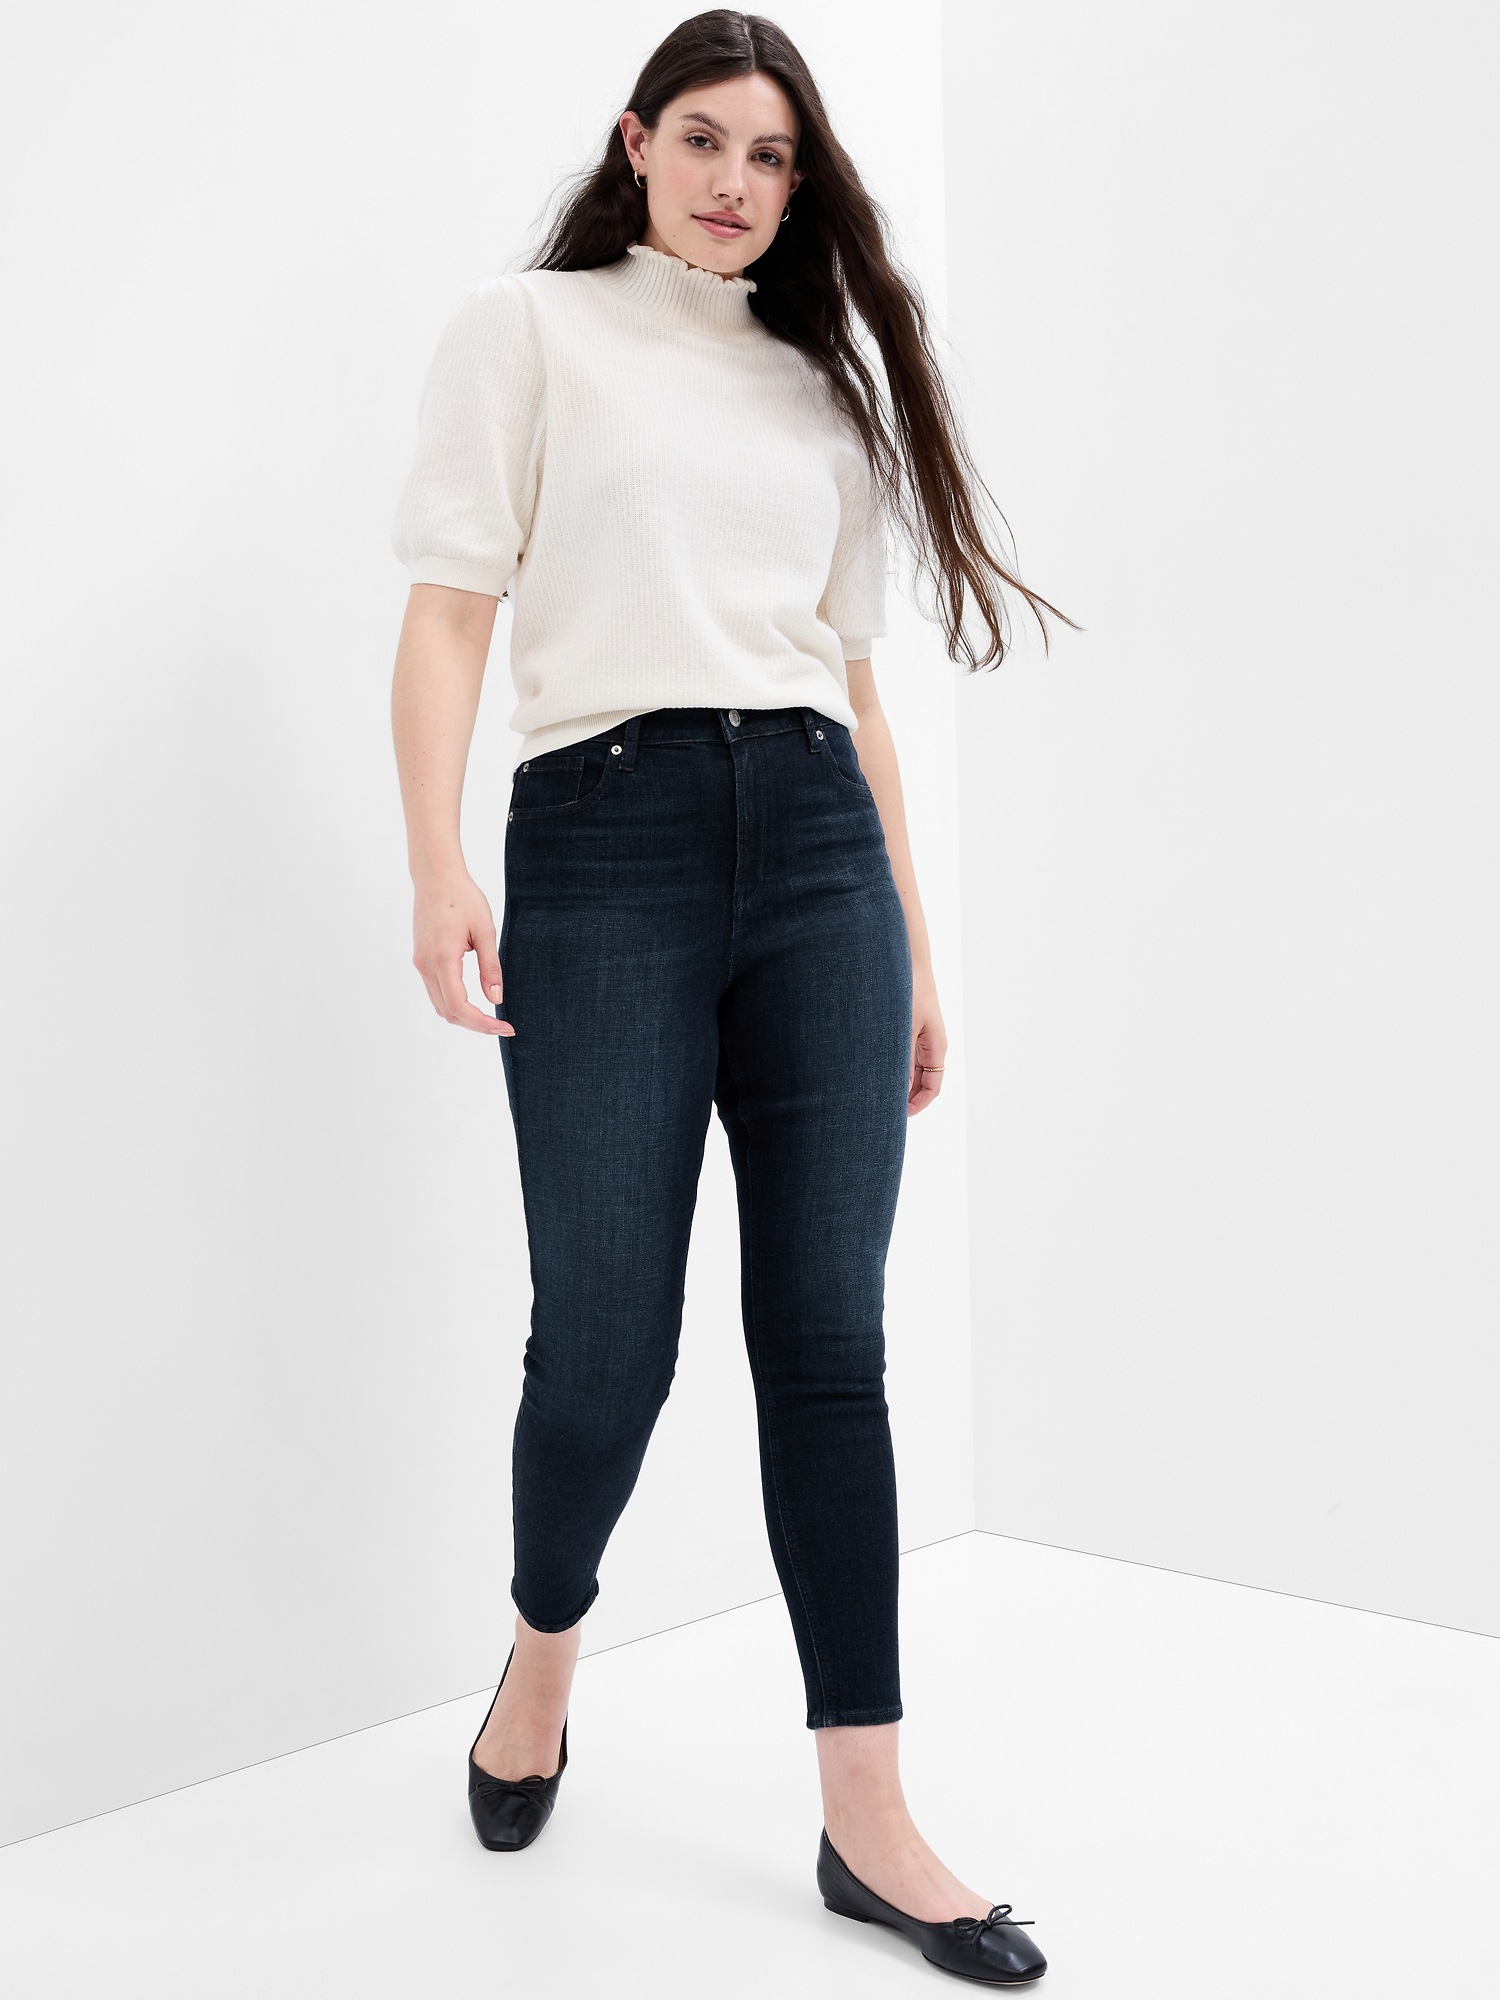 High Rise Universal Legging Jeans With Washwell | Gap Factory